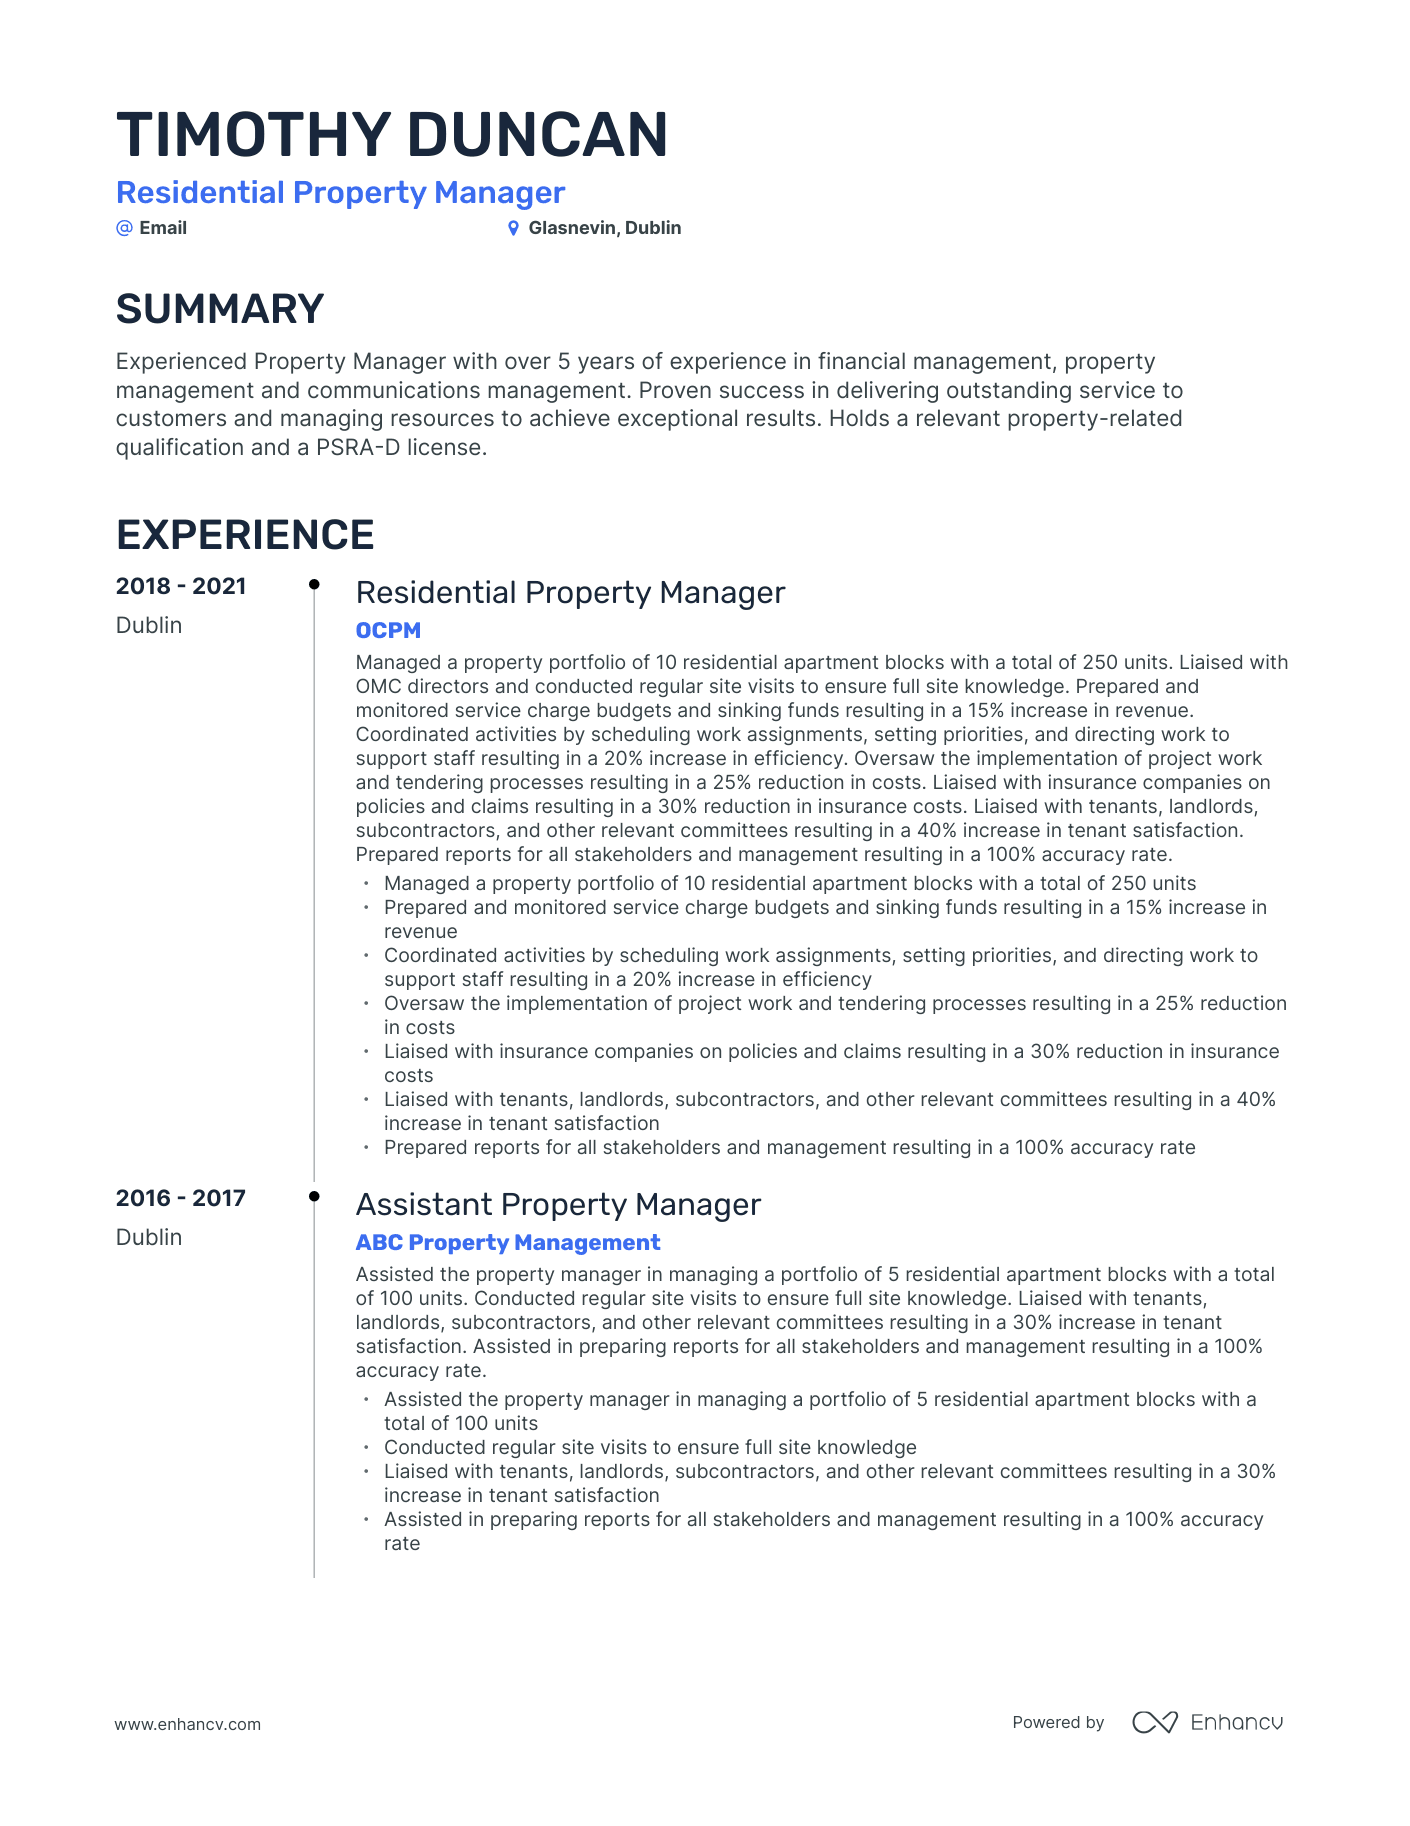 Timeline Residential Property Manager Resume Template